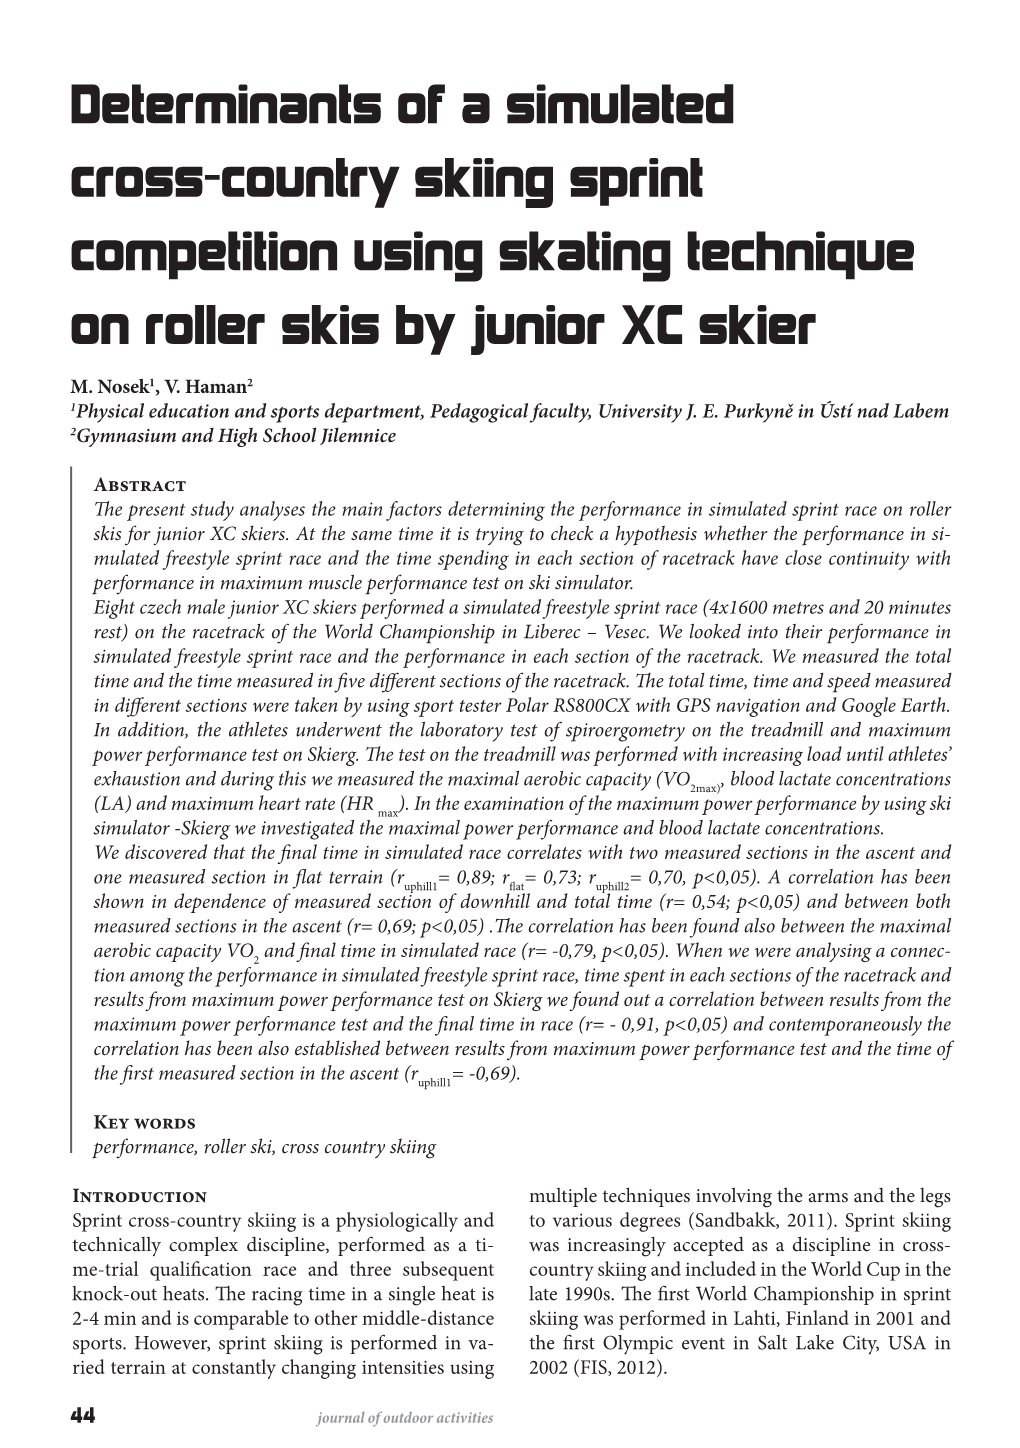 Determinants of a Simulated Cross-Country Skiing Sprint Competition Using Skating Technique on Roller Skis by Junior XC Skier